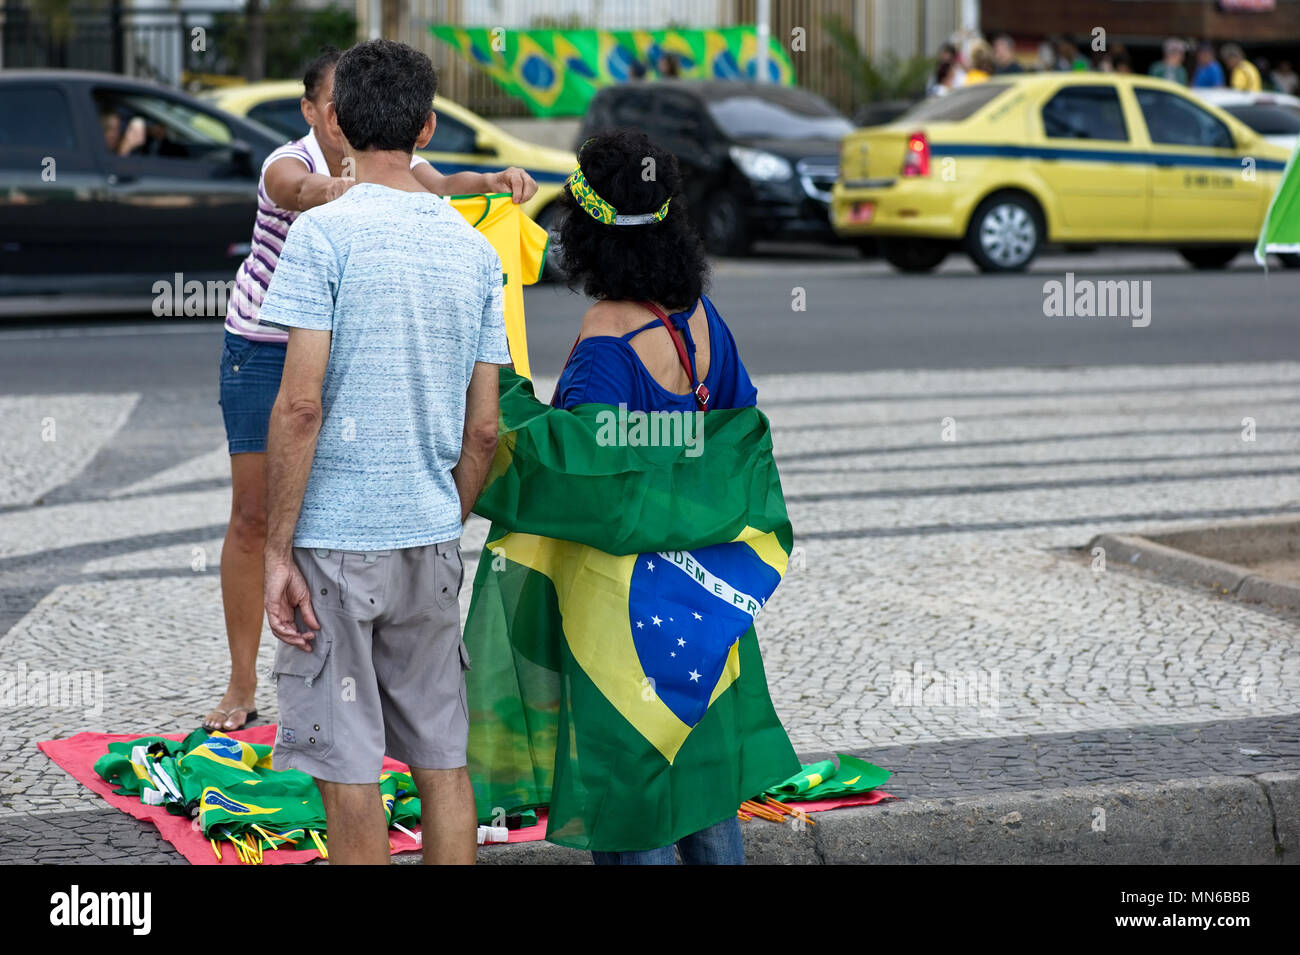 Copacabana beach, Rio de Janeiro - April 17, 2016: Street vendors sell the national flags of Brazil during a protest against president Dilma Rousseff Stock Photo